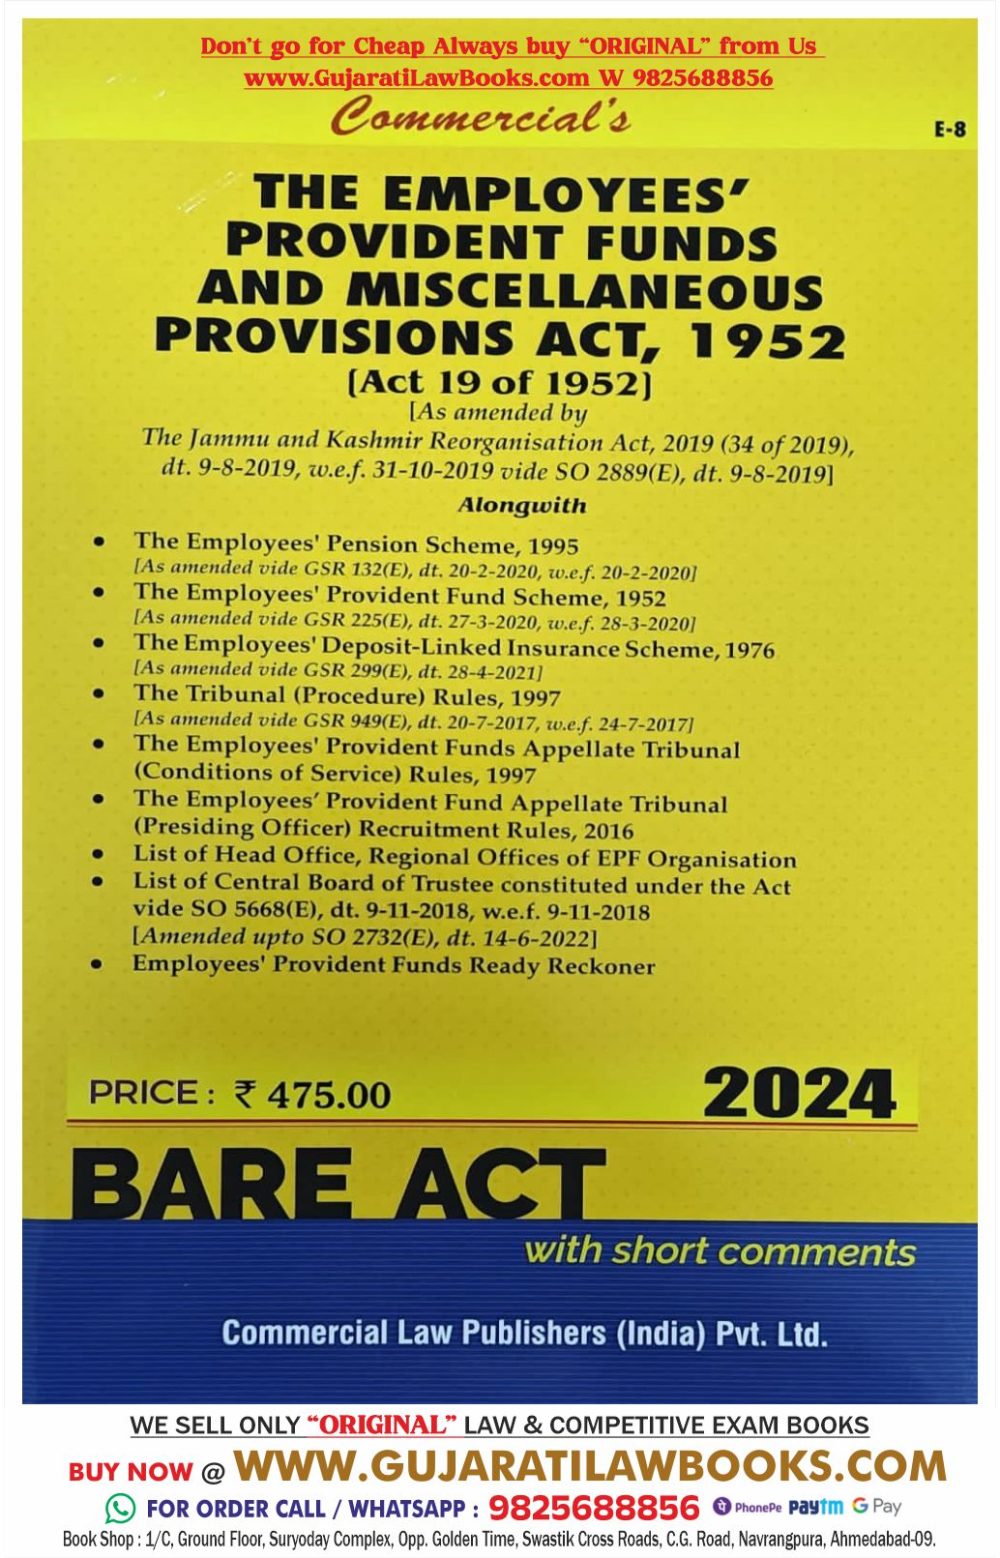 Employees Provident Funds and Miscellaneous Provisions Act, 1952 - BARE ACT - Latest 2024 Edition Commercial